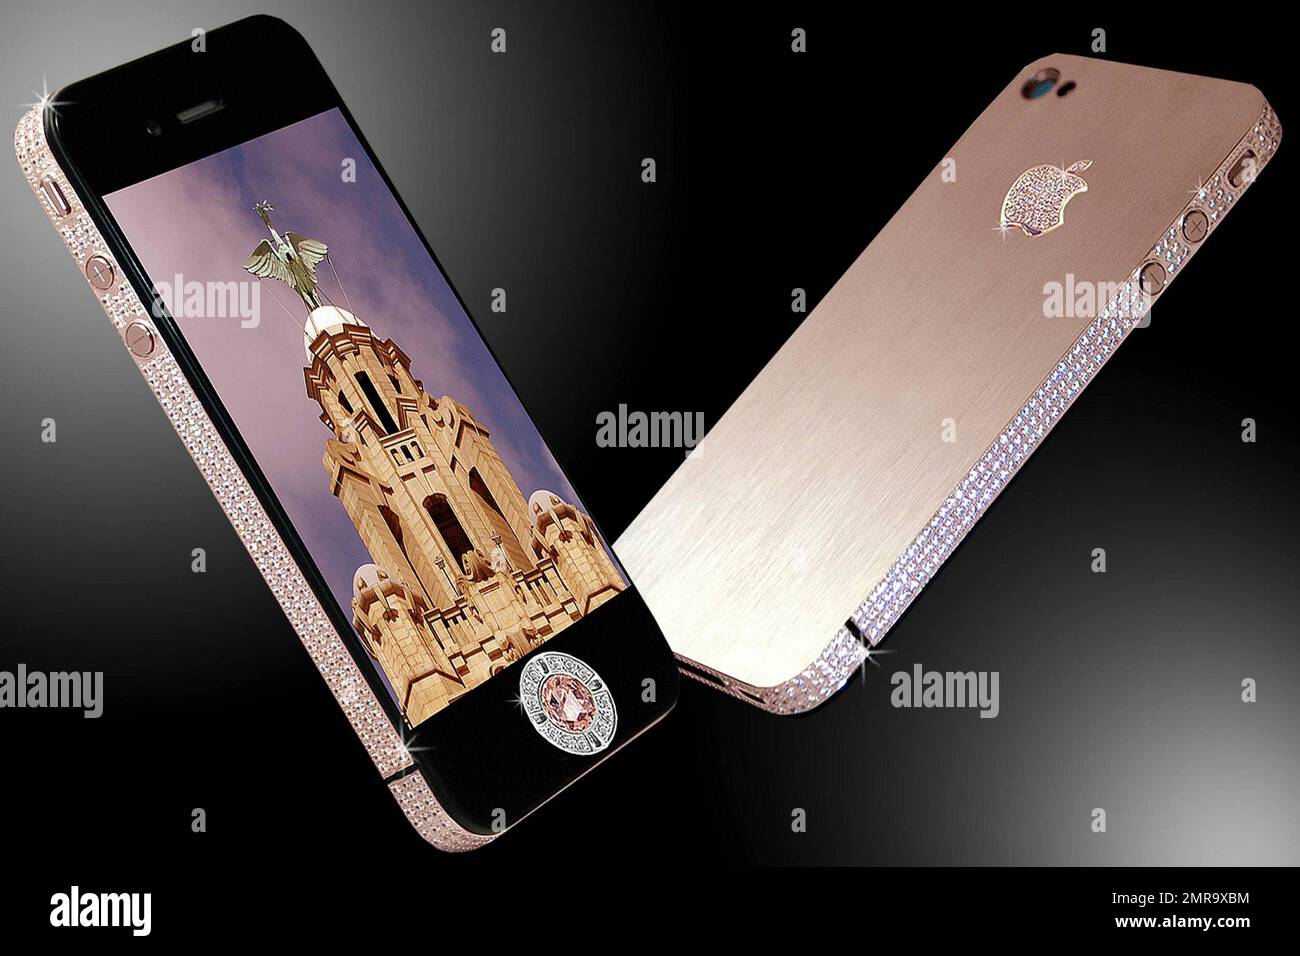 Are you looking for the most expensive and luxurious phone money can buy? Look no further. Stuart Hughes, known of the pioneer of luxurious gadgets, has now released the iPhone 4 Diamond Rose, the world's most expensive phone. With a price tag of $8 million, the phone features a number of exclusive touches including a bezel handmade from rose gold with approximately 500 individual flawless diamonds totaling over 100 carats and the rear surface, also made entirely of rose gold, with an added Apple logo featuring 53 diamonds. The main navigation is made of platinum holding a 7.4 carat pink diamo Stock Photo